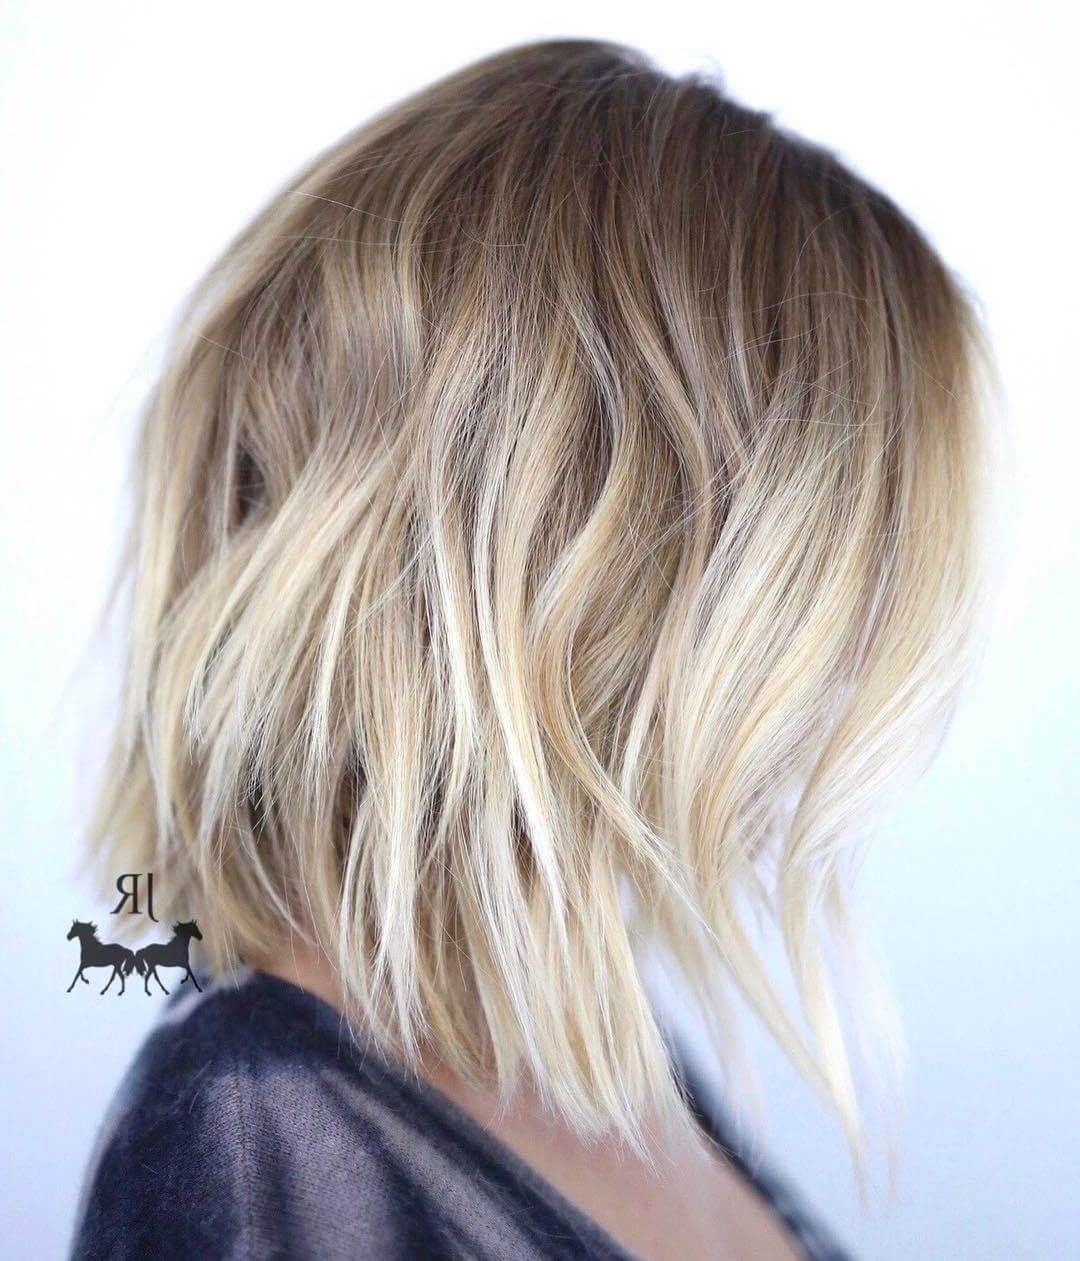 50 Fresh Short Blonde Hair Ideas To Update Your Style In 2018 With Well Liked Choppy Cut Blonde Hairstyles With Bright Frame (View 2 of 20)